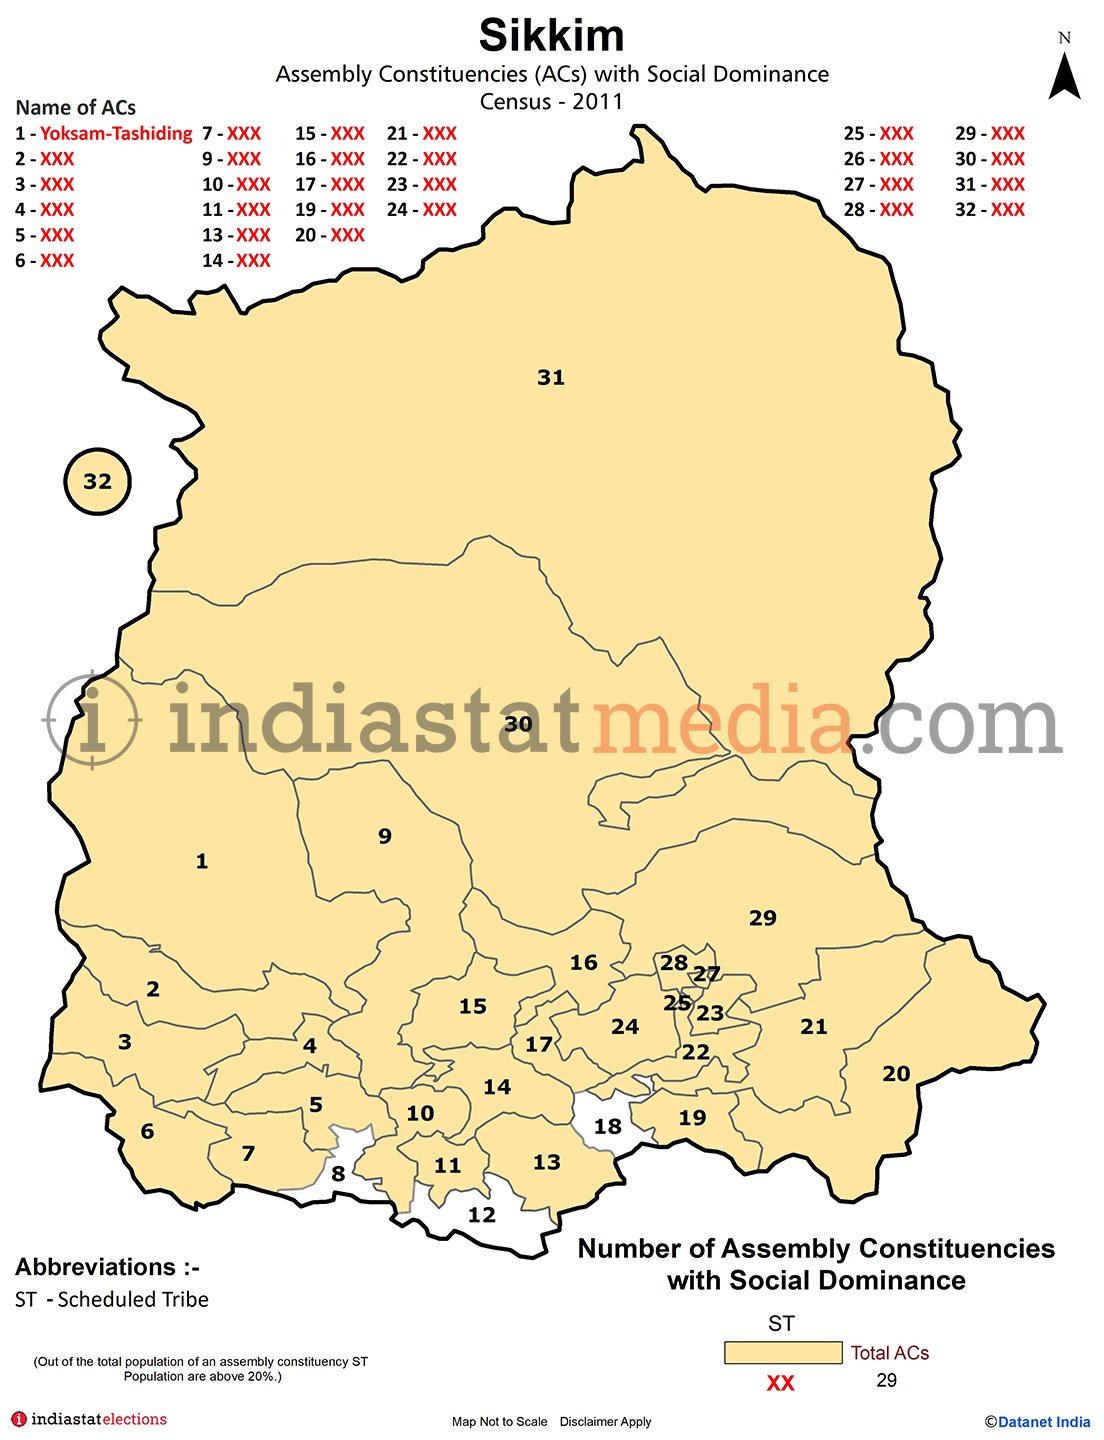 Assembly Constituencies with Social Dominance in Sikkim - Census 2011